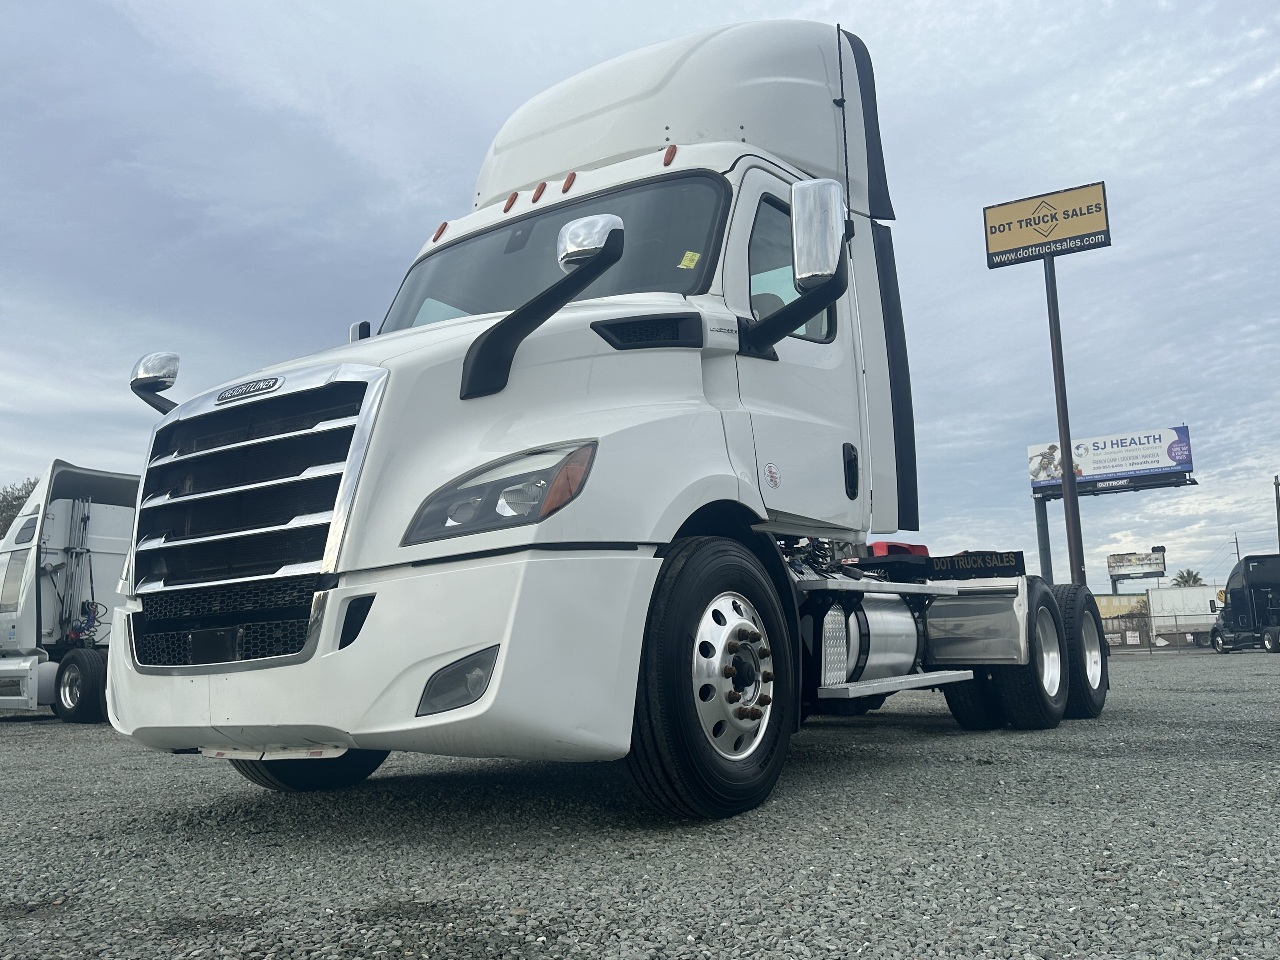 USED 2019 FREIGHTLINER CASCADIA DAYCAB TRUCK #2104